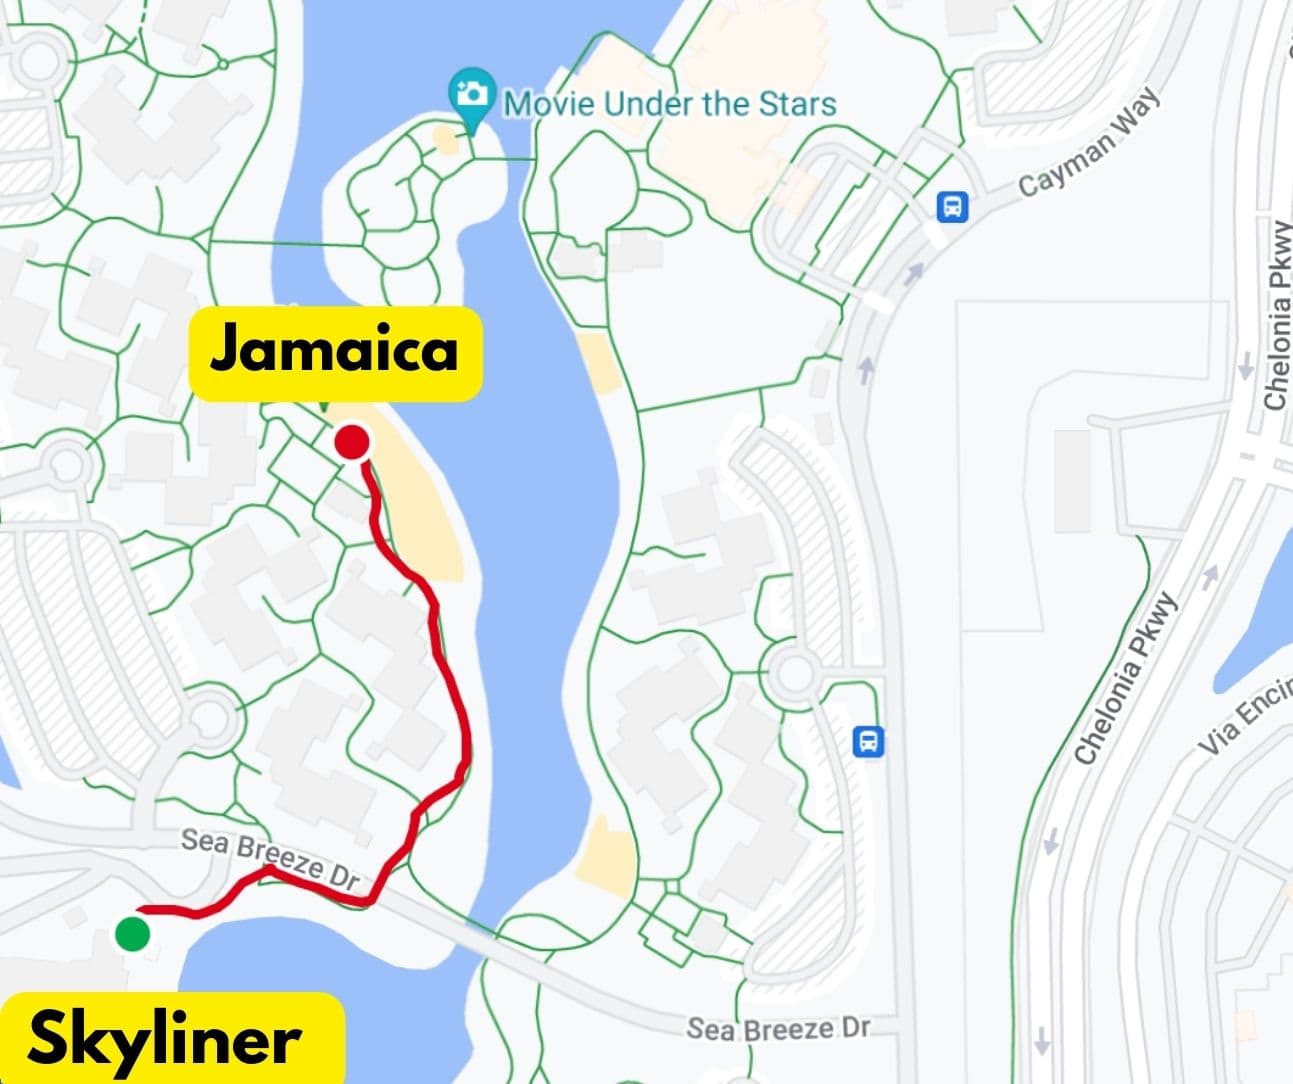 walking distance from the Skyliner to Jamaica 